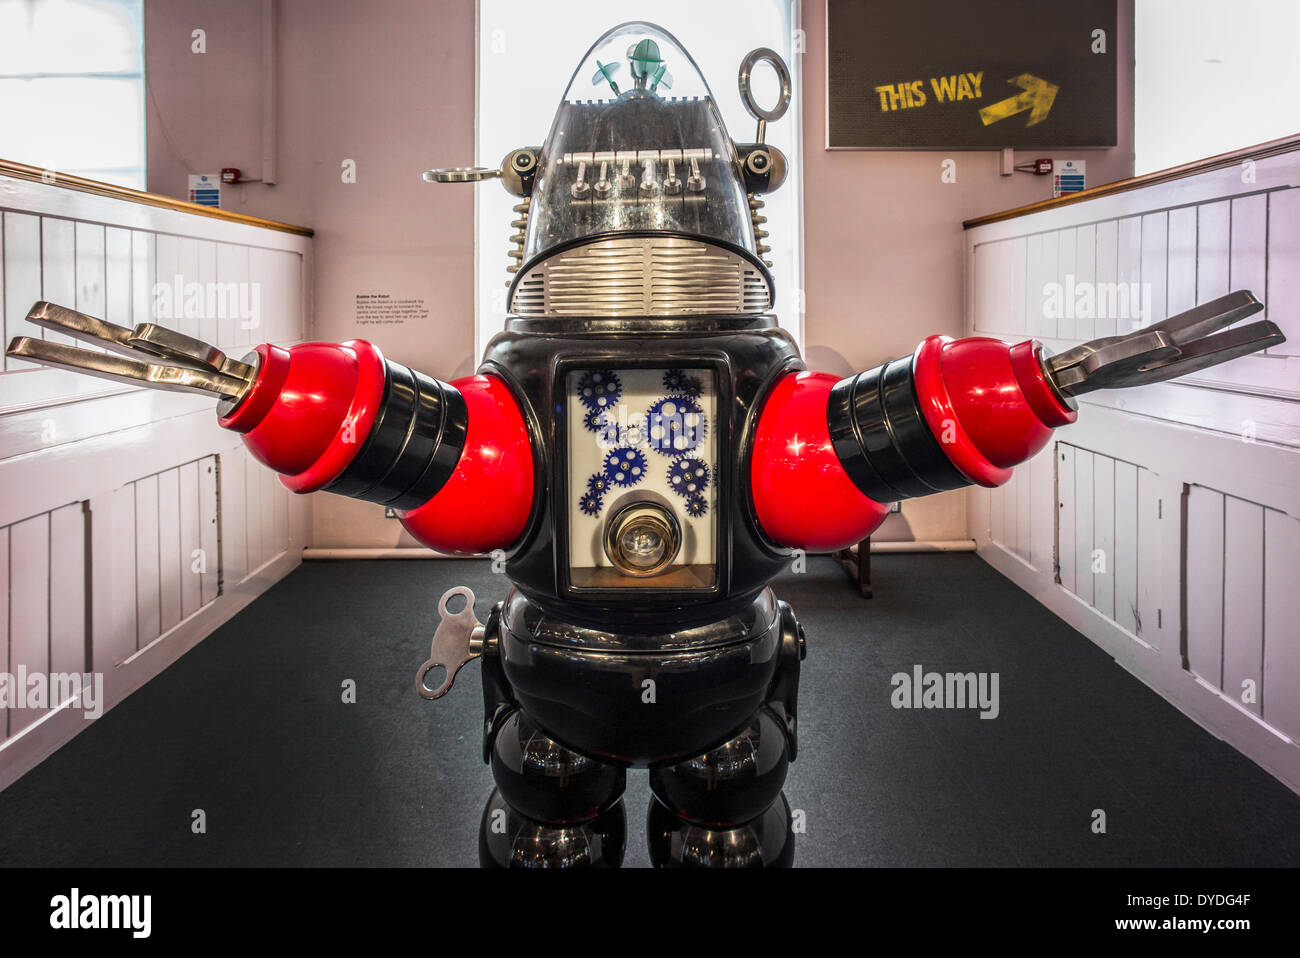 Robby il Robot presso il Victoria and Albert Museum of Childhood. Foto Stock